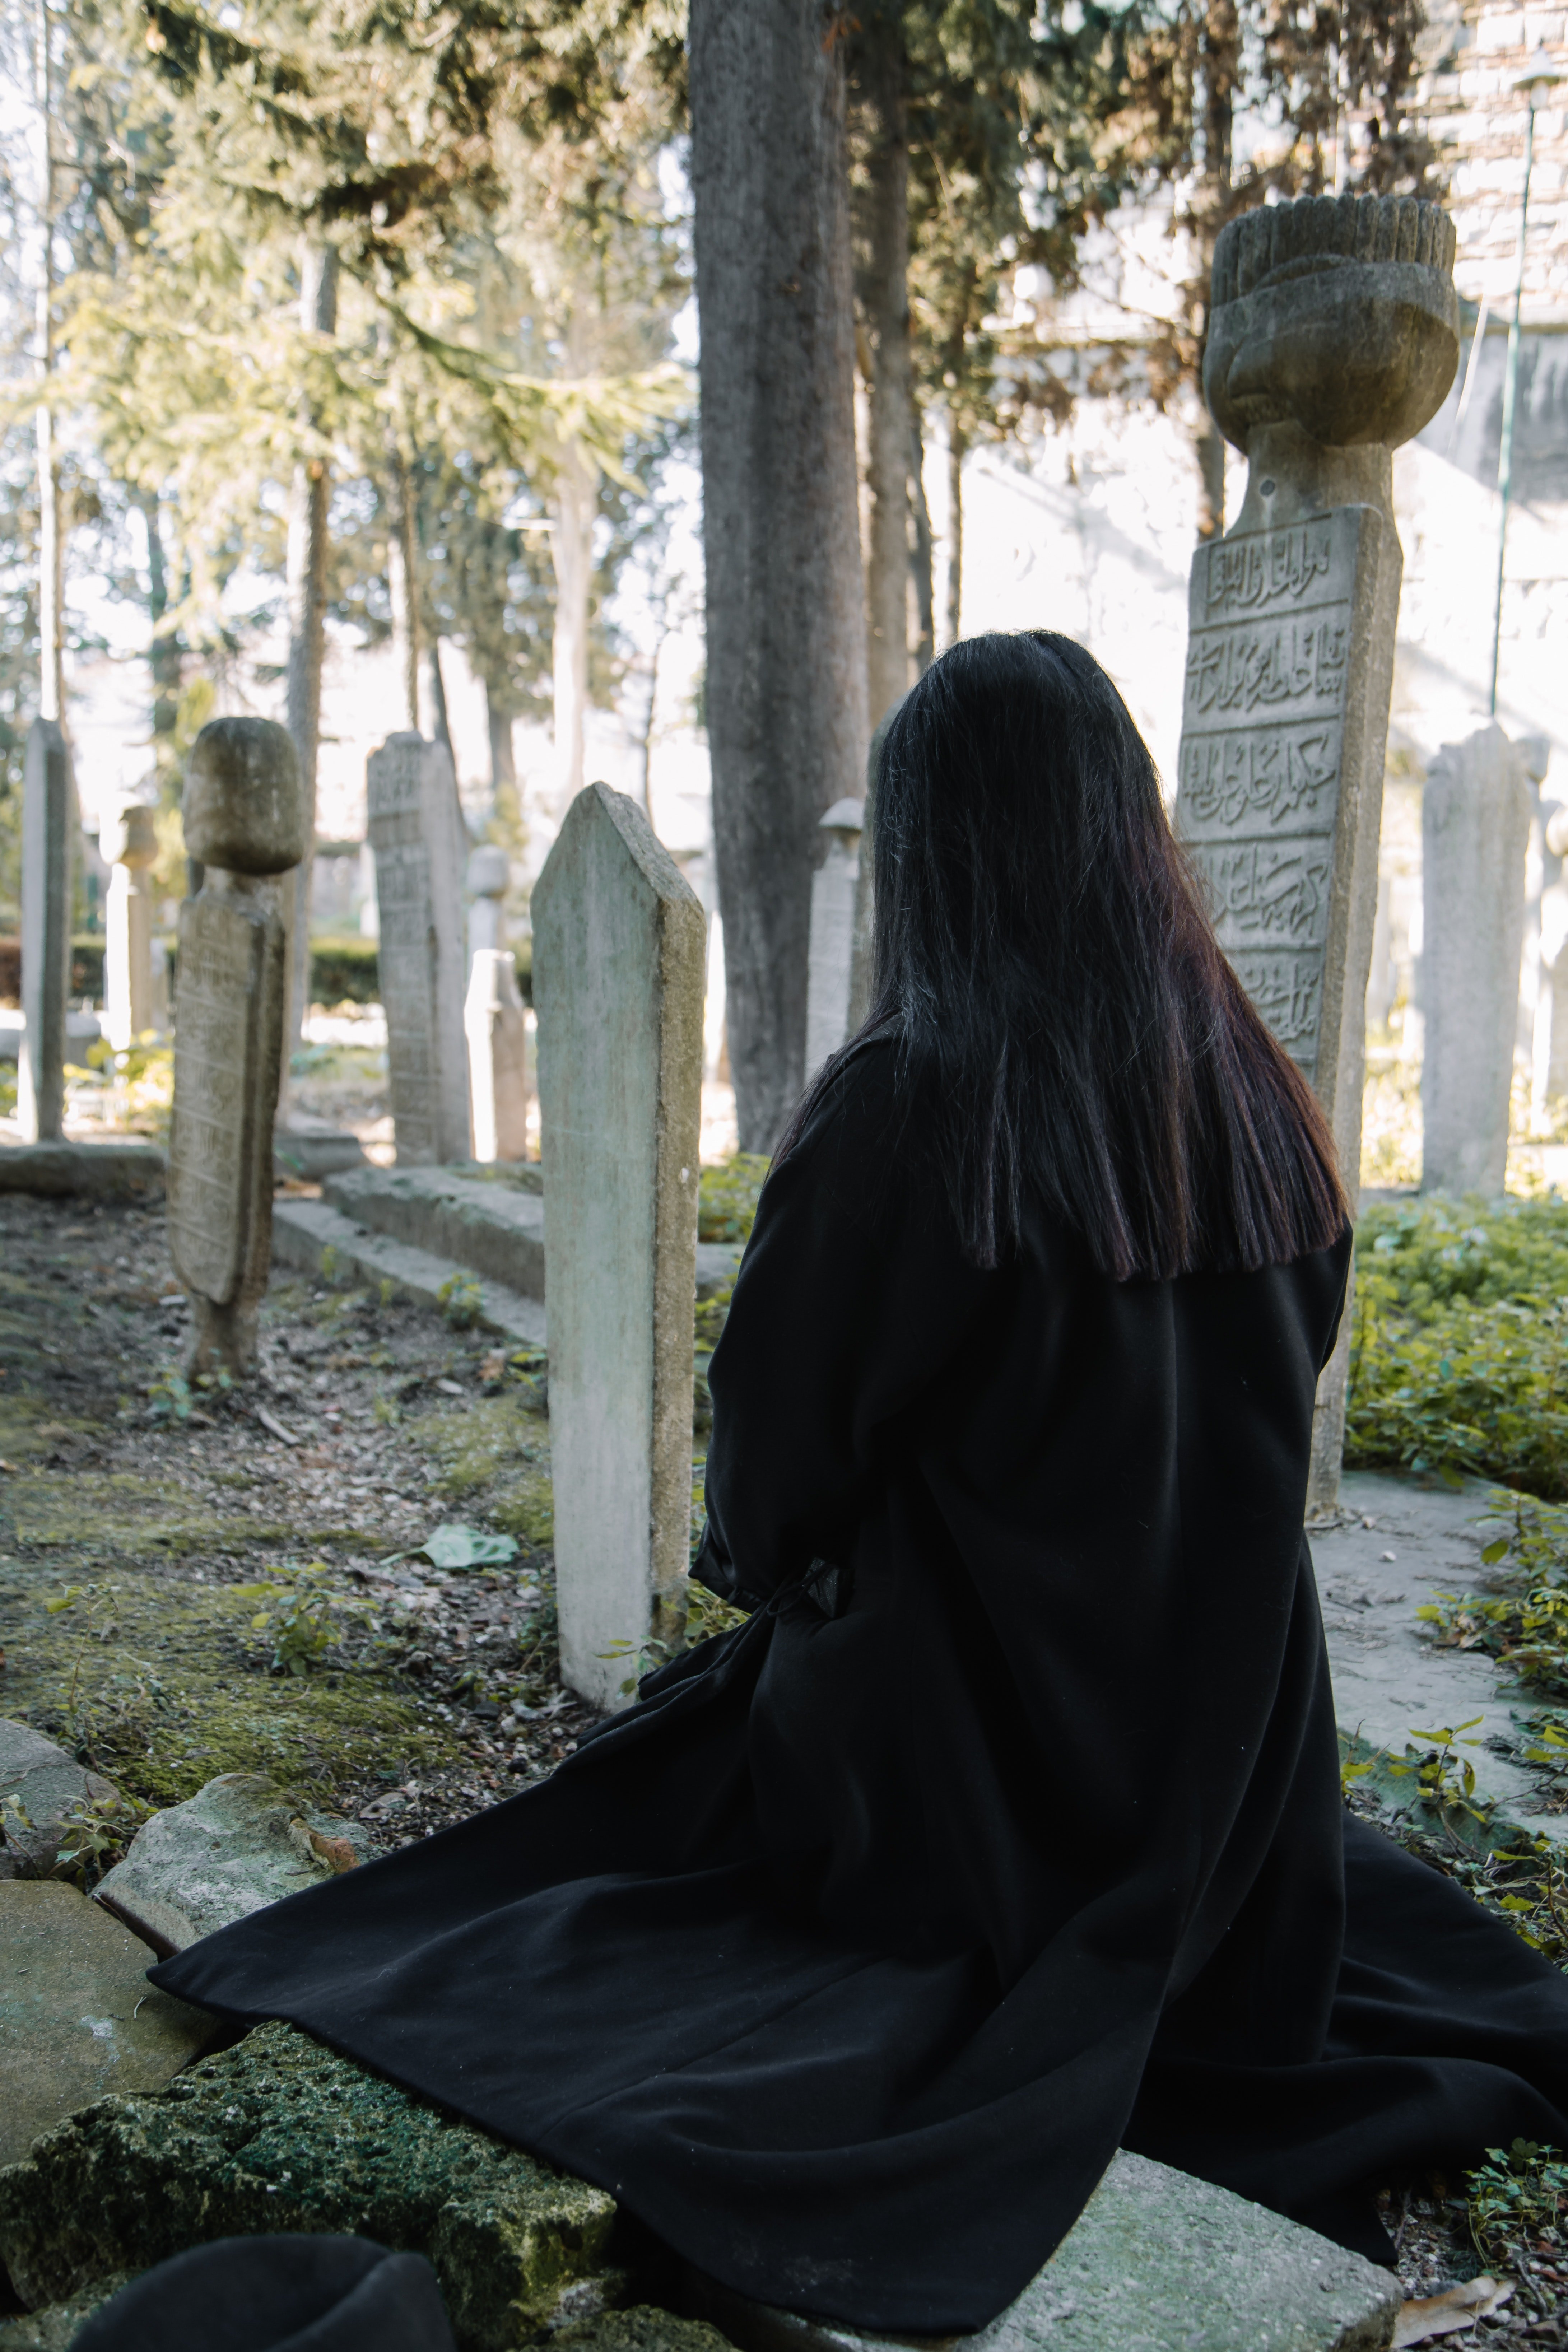 Lily met a young woman named Carrie at her son's grave | Photo: Pexels